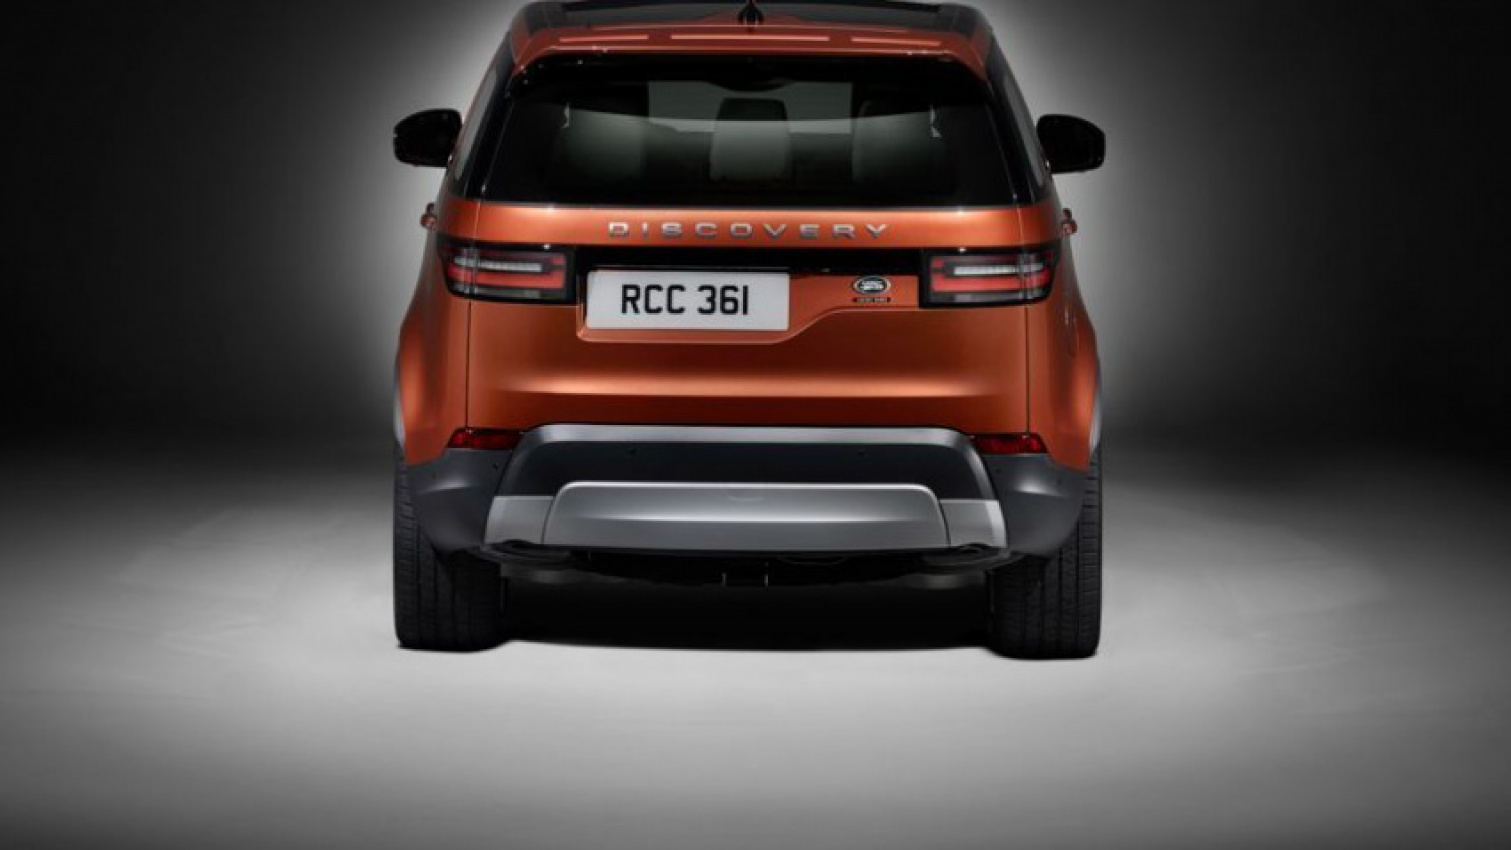 autos, cars, 2017 land rover discovery, auto news, discovery, land rover, paris 2016, paris 2016: 2017 lr discovery revealed ahead of show